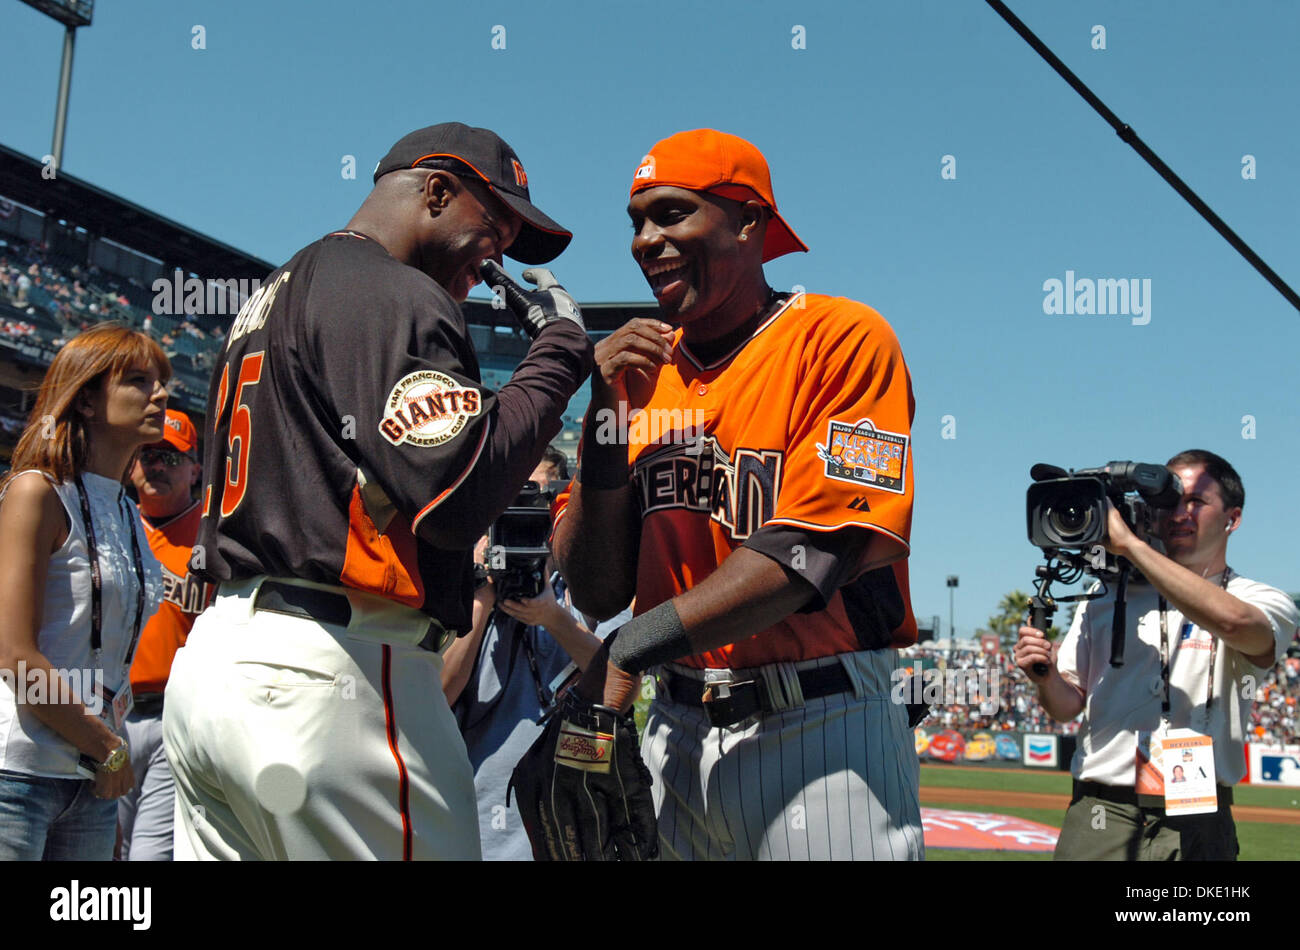 July 9th, 2007 - San Francisco, CA, USA - Minnesota Twins Torii Hunter and  San Francisco Giants Barry Bonds laugh it up during batting practice for  the 2007 All-Star Game at AT&T